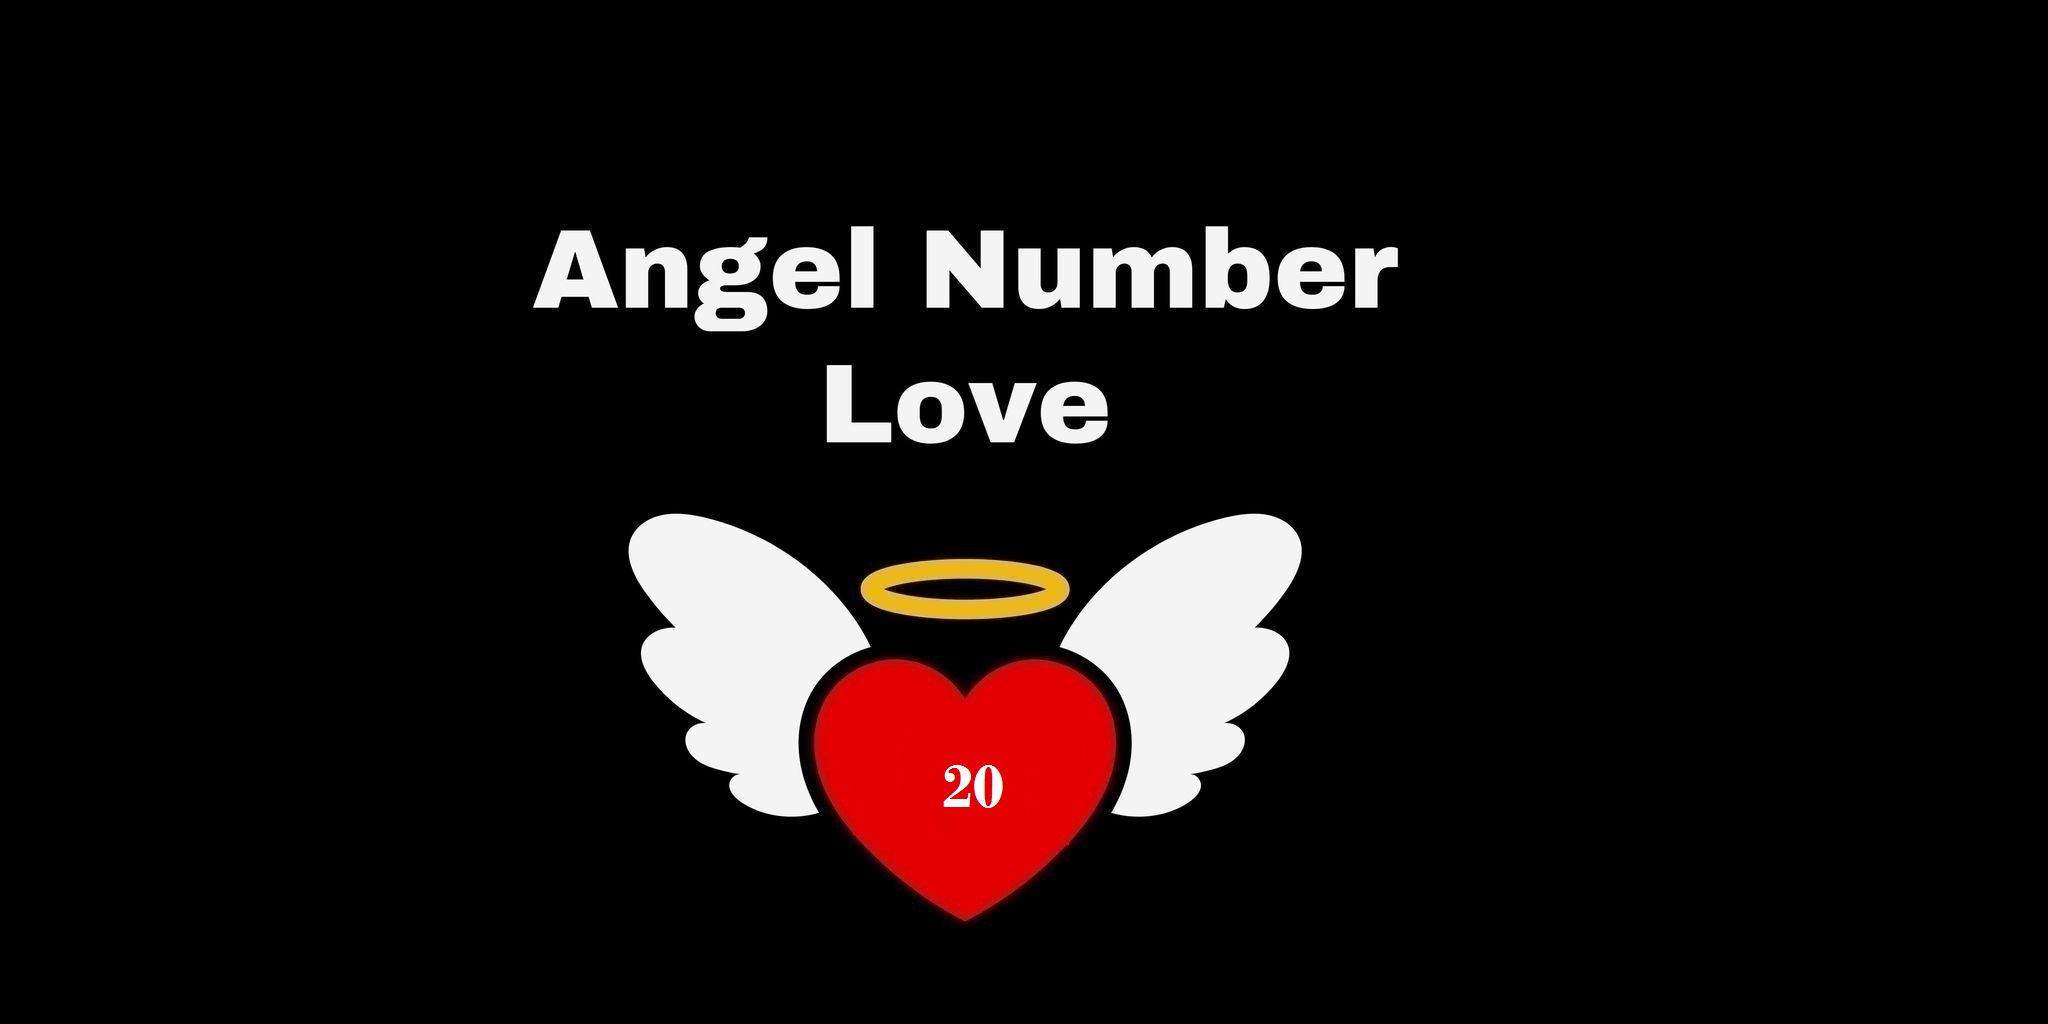 20 Angel Number Meaning In Love